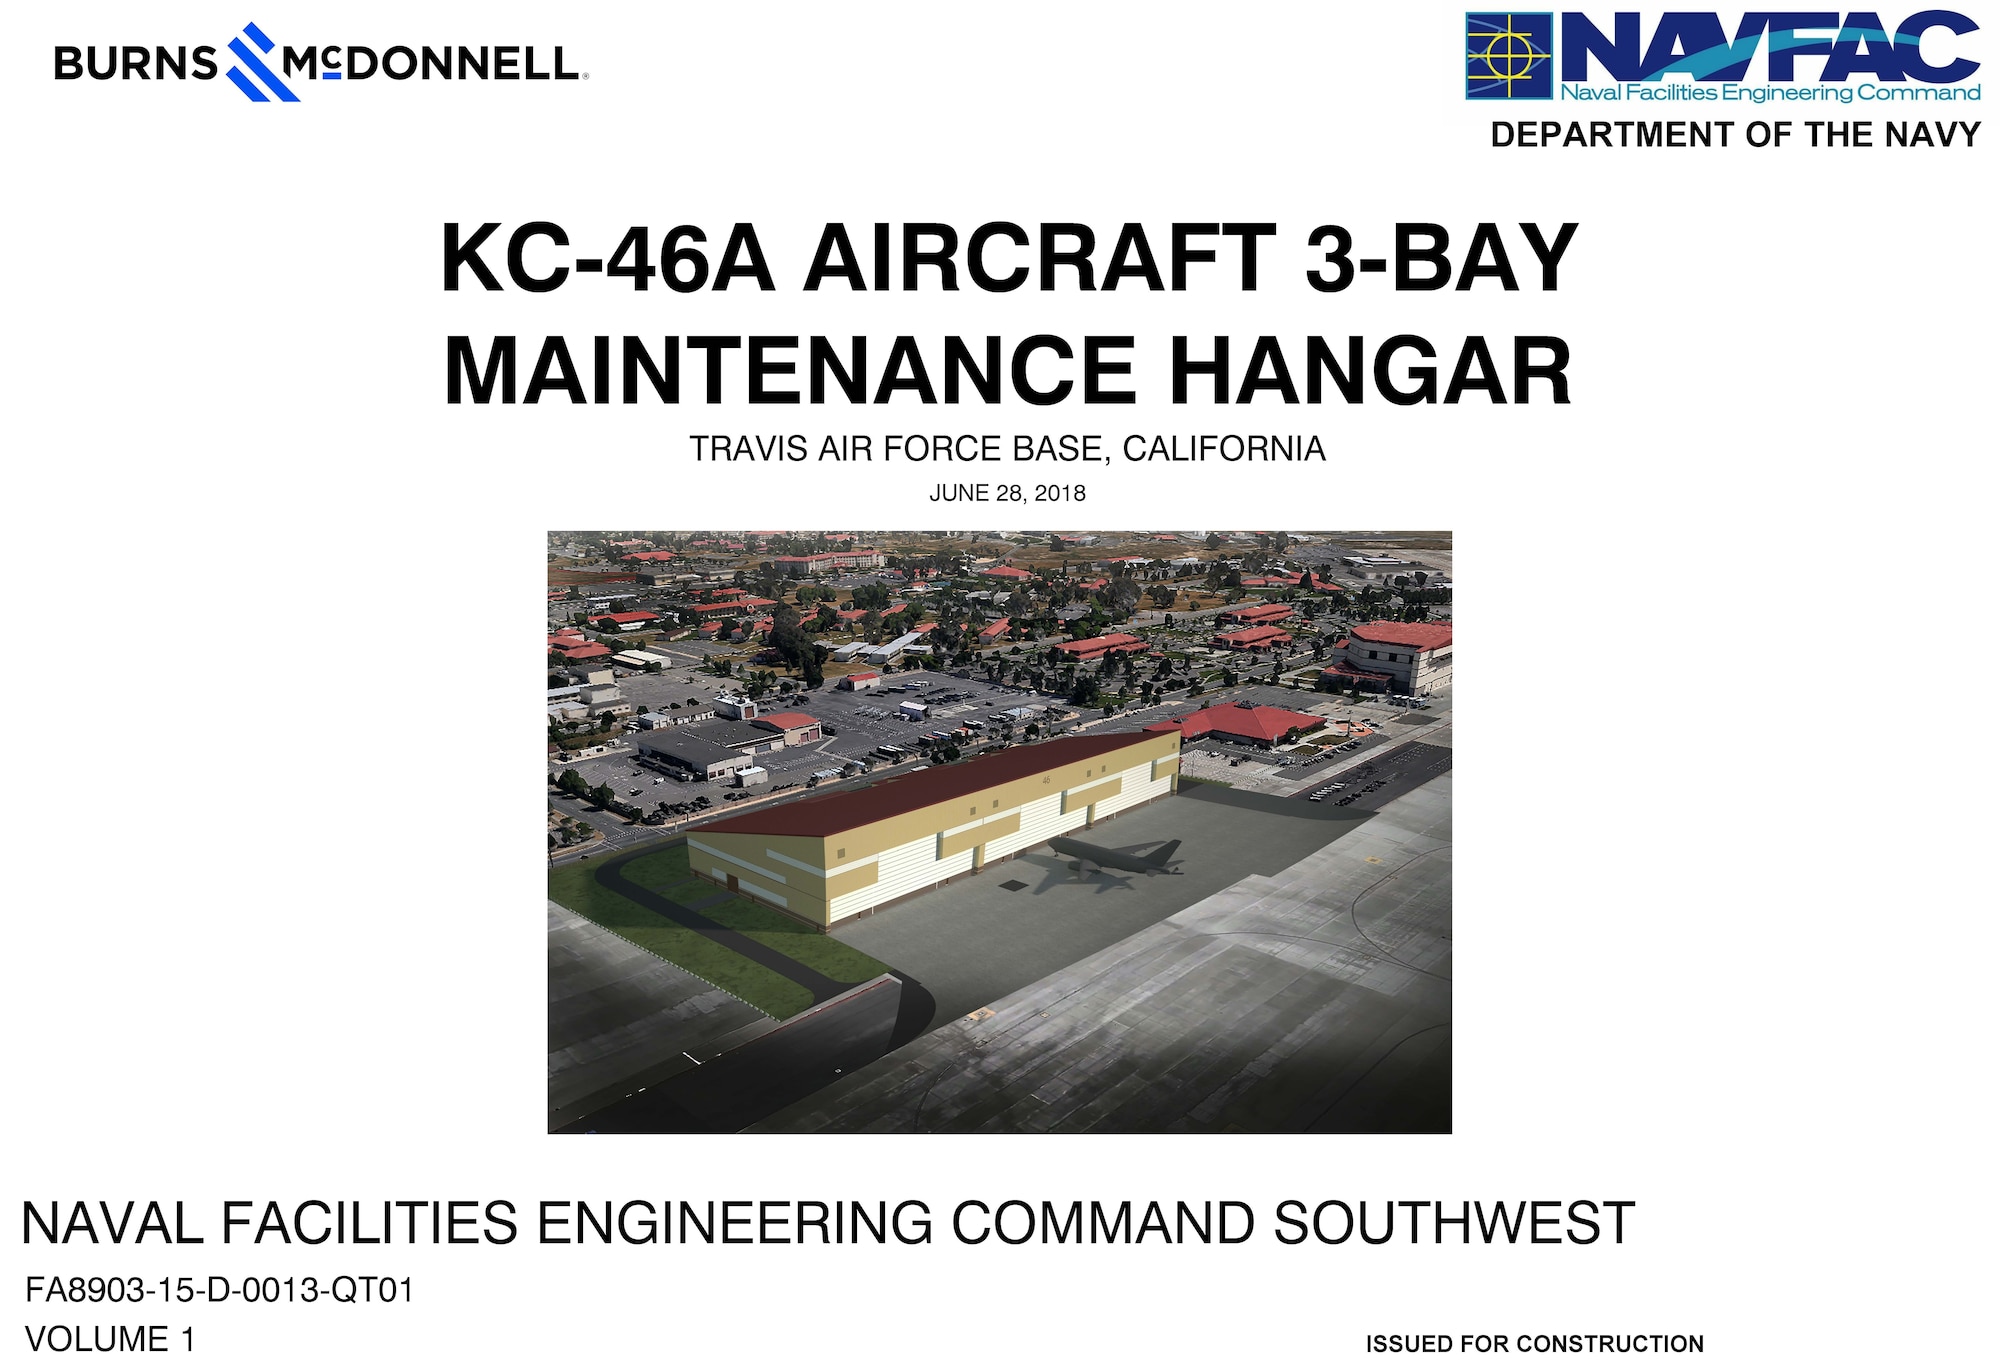 An artist rendering of the KC-46A aircraft three-bay maintenance hangar for Travis Air Force Base, California. (Courtesy graphic)